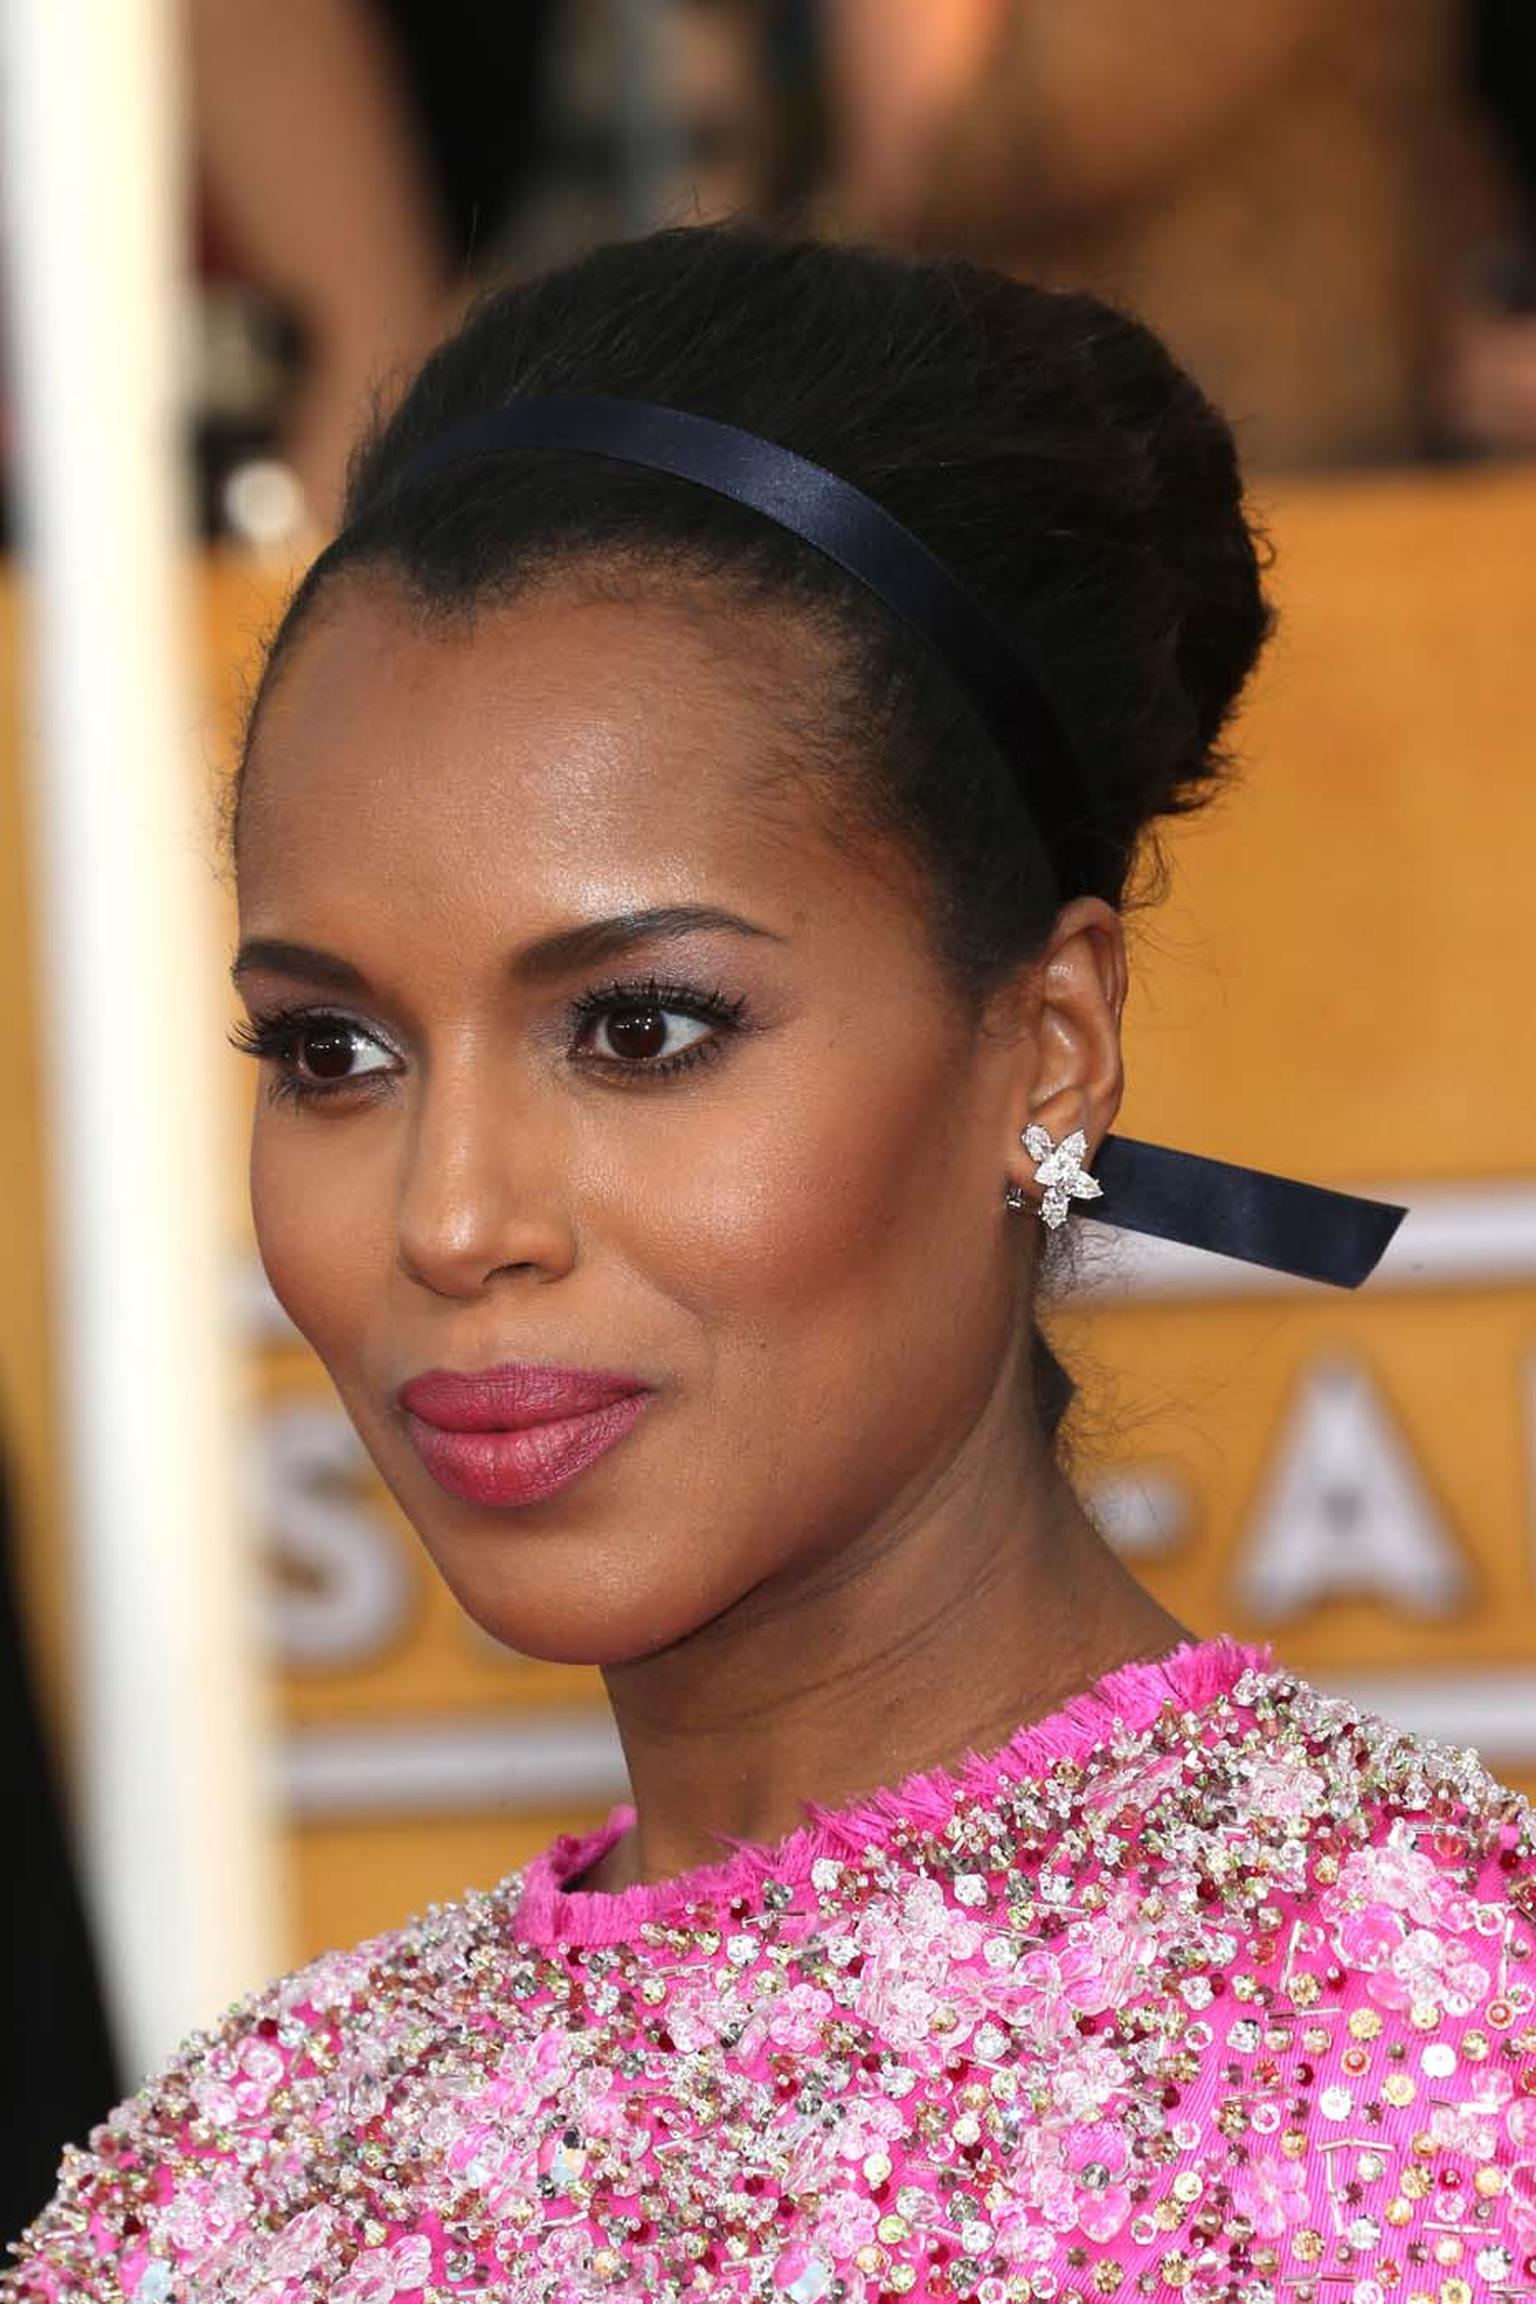 Kerry Washington opted for a fuchsia dress and Harry Winston 'Cluster' diamond earrings at the Screen Actors Guild Awards in January